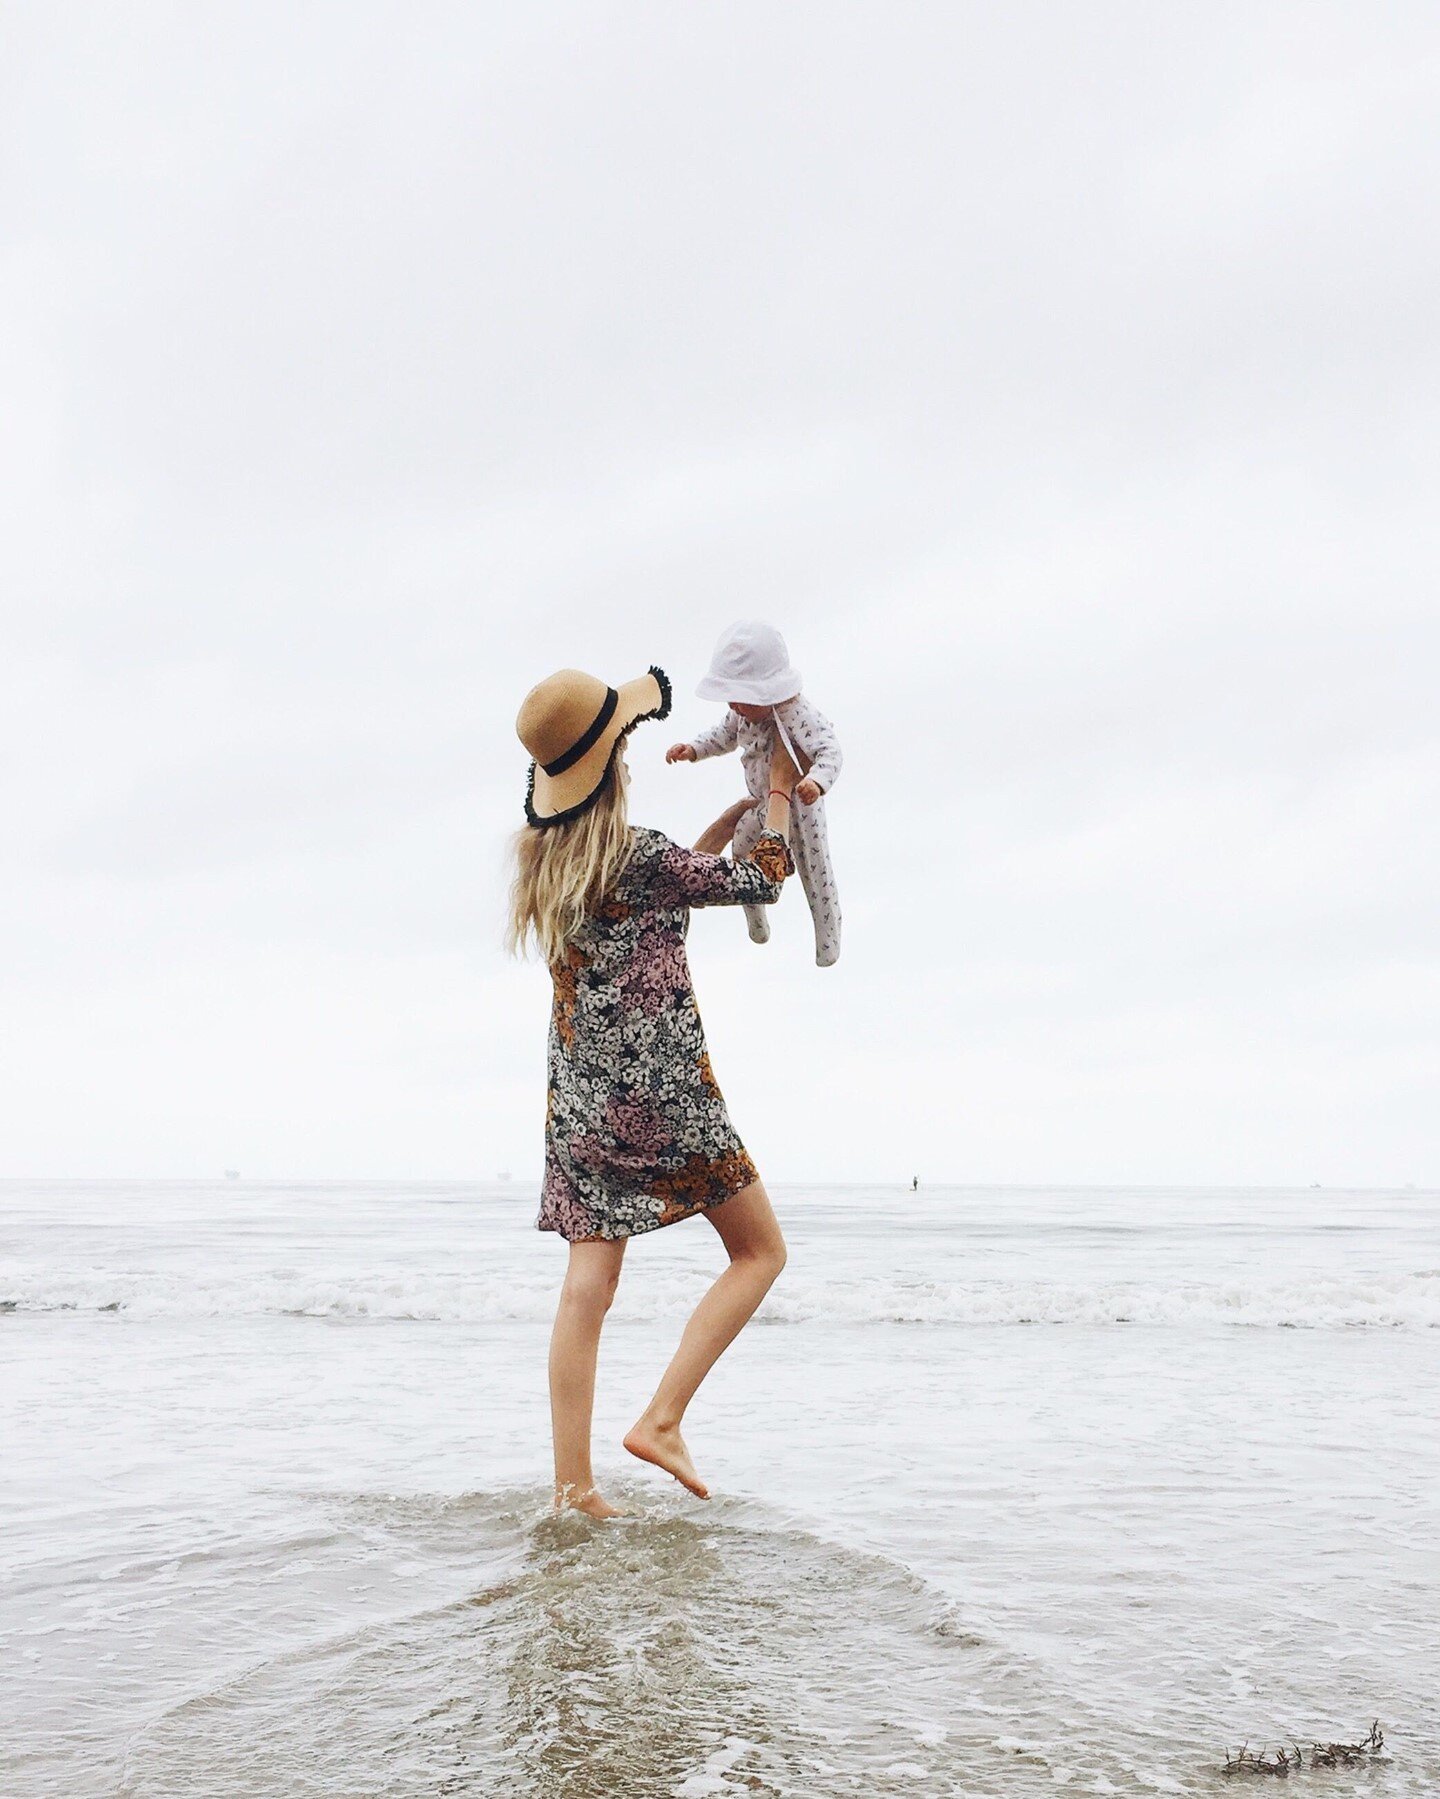 One of our favorite parts of Motherhood? ⁣
⁣
Watching little ones have their Firsts&hellip; ⁣
From first times tasting ice cream to feeling the ocean between their toes we&rsquo;re big time suckers for those special moments. ⁣
⁣
What&rsquo;s your all